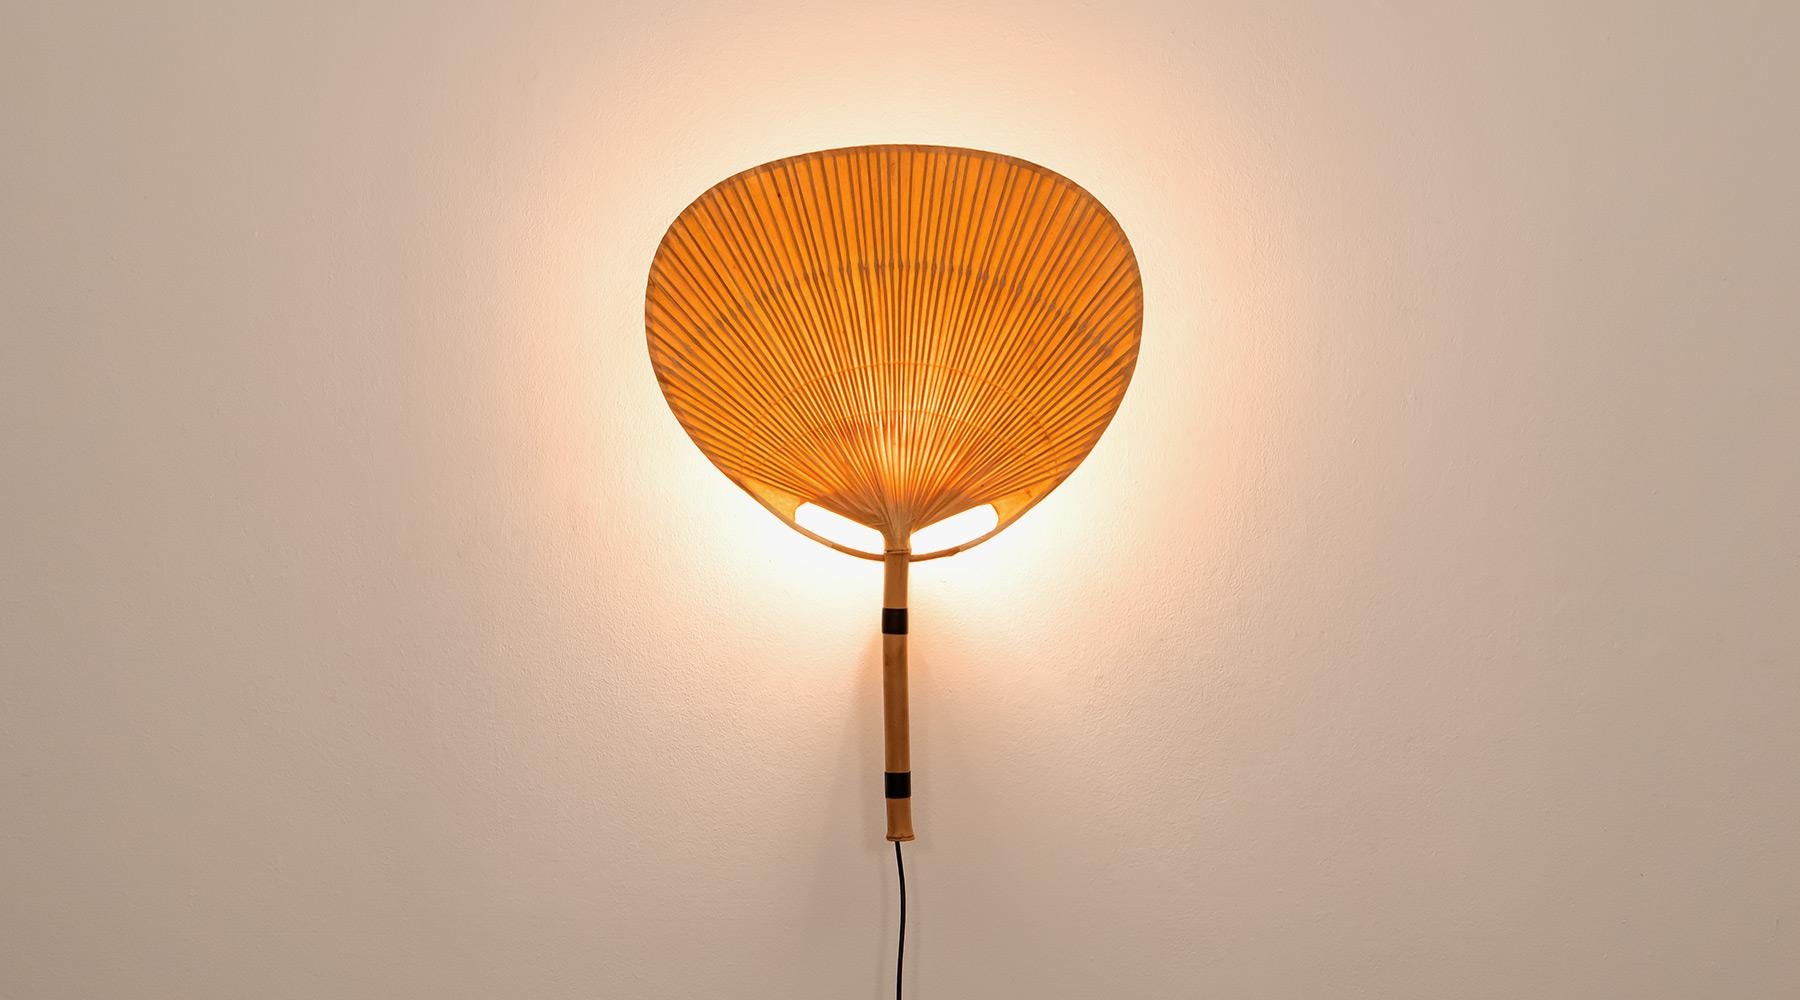 Sconce or wall lamp, paper, bamboo, Germany, 1973.

Wall lamp by Ingo Maurer from 1970s. Bamboo combined with paper gives a delicate bright light. The sconce from the series 'Uchiwa' act to the wall like an art object. Manufactured by Ingo Maurer.